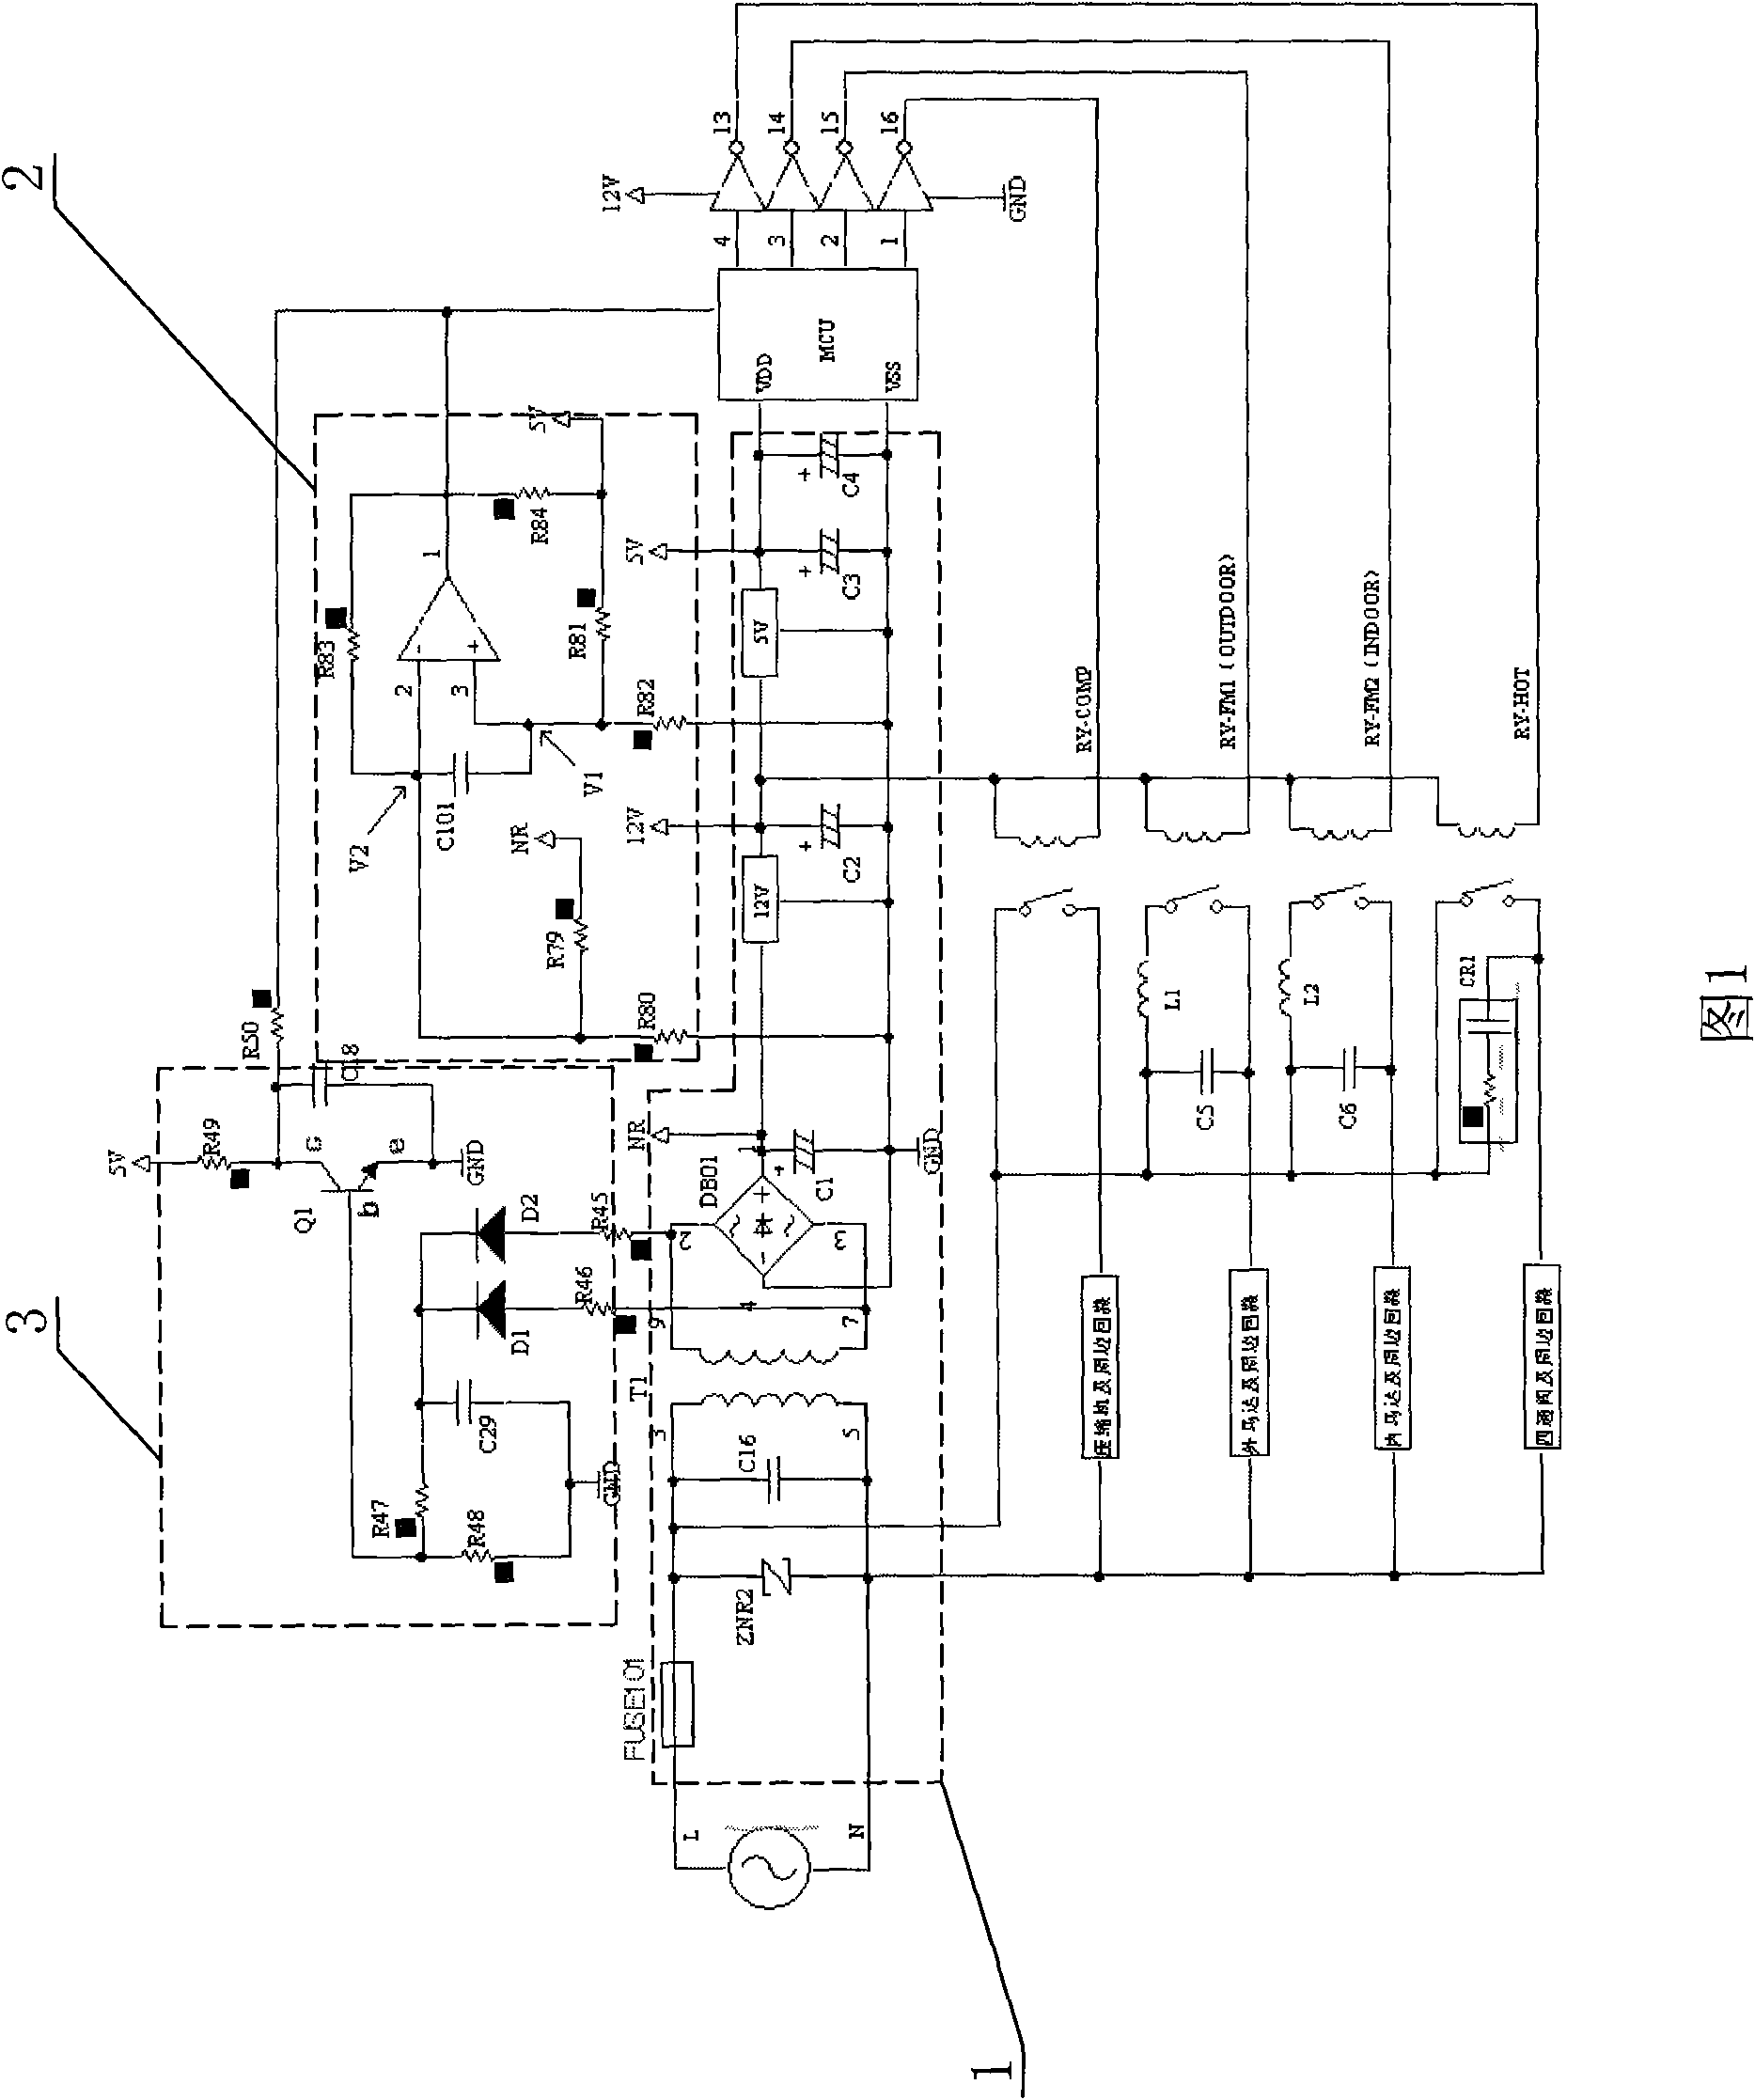 AC overvoltage protection device